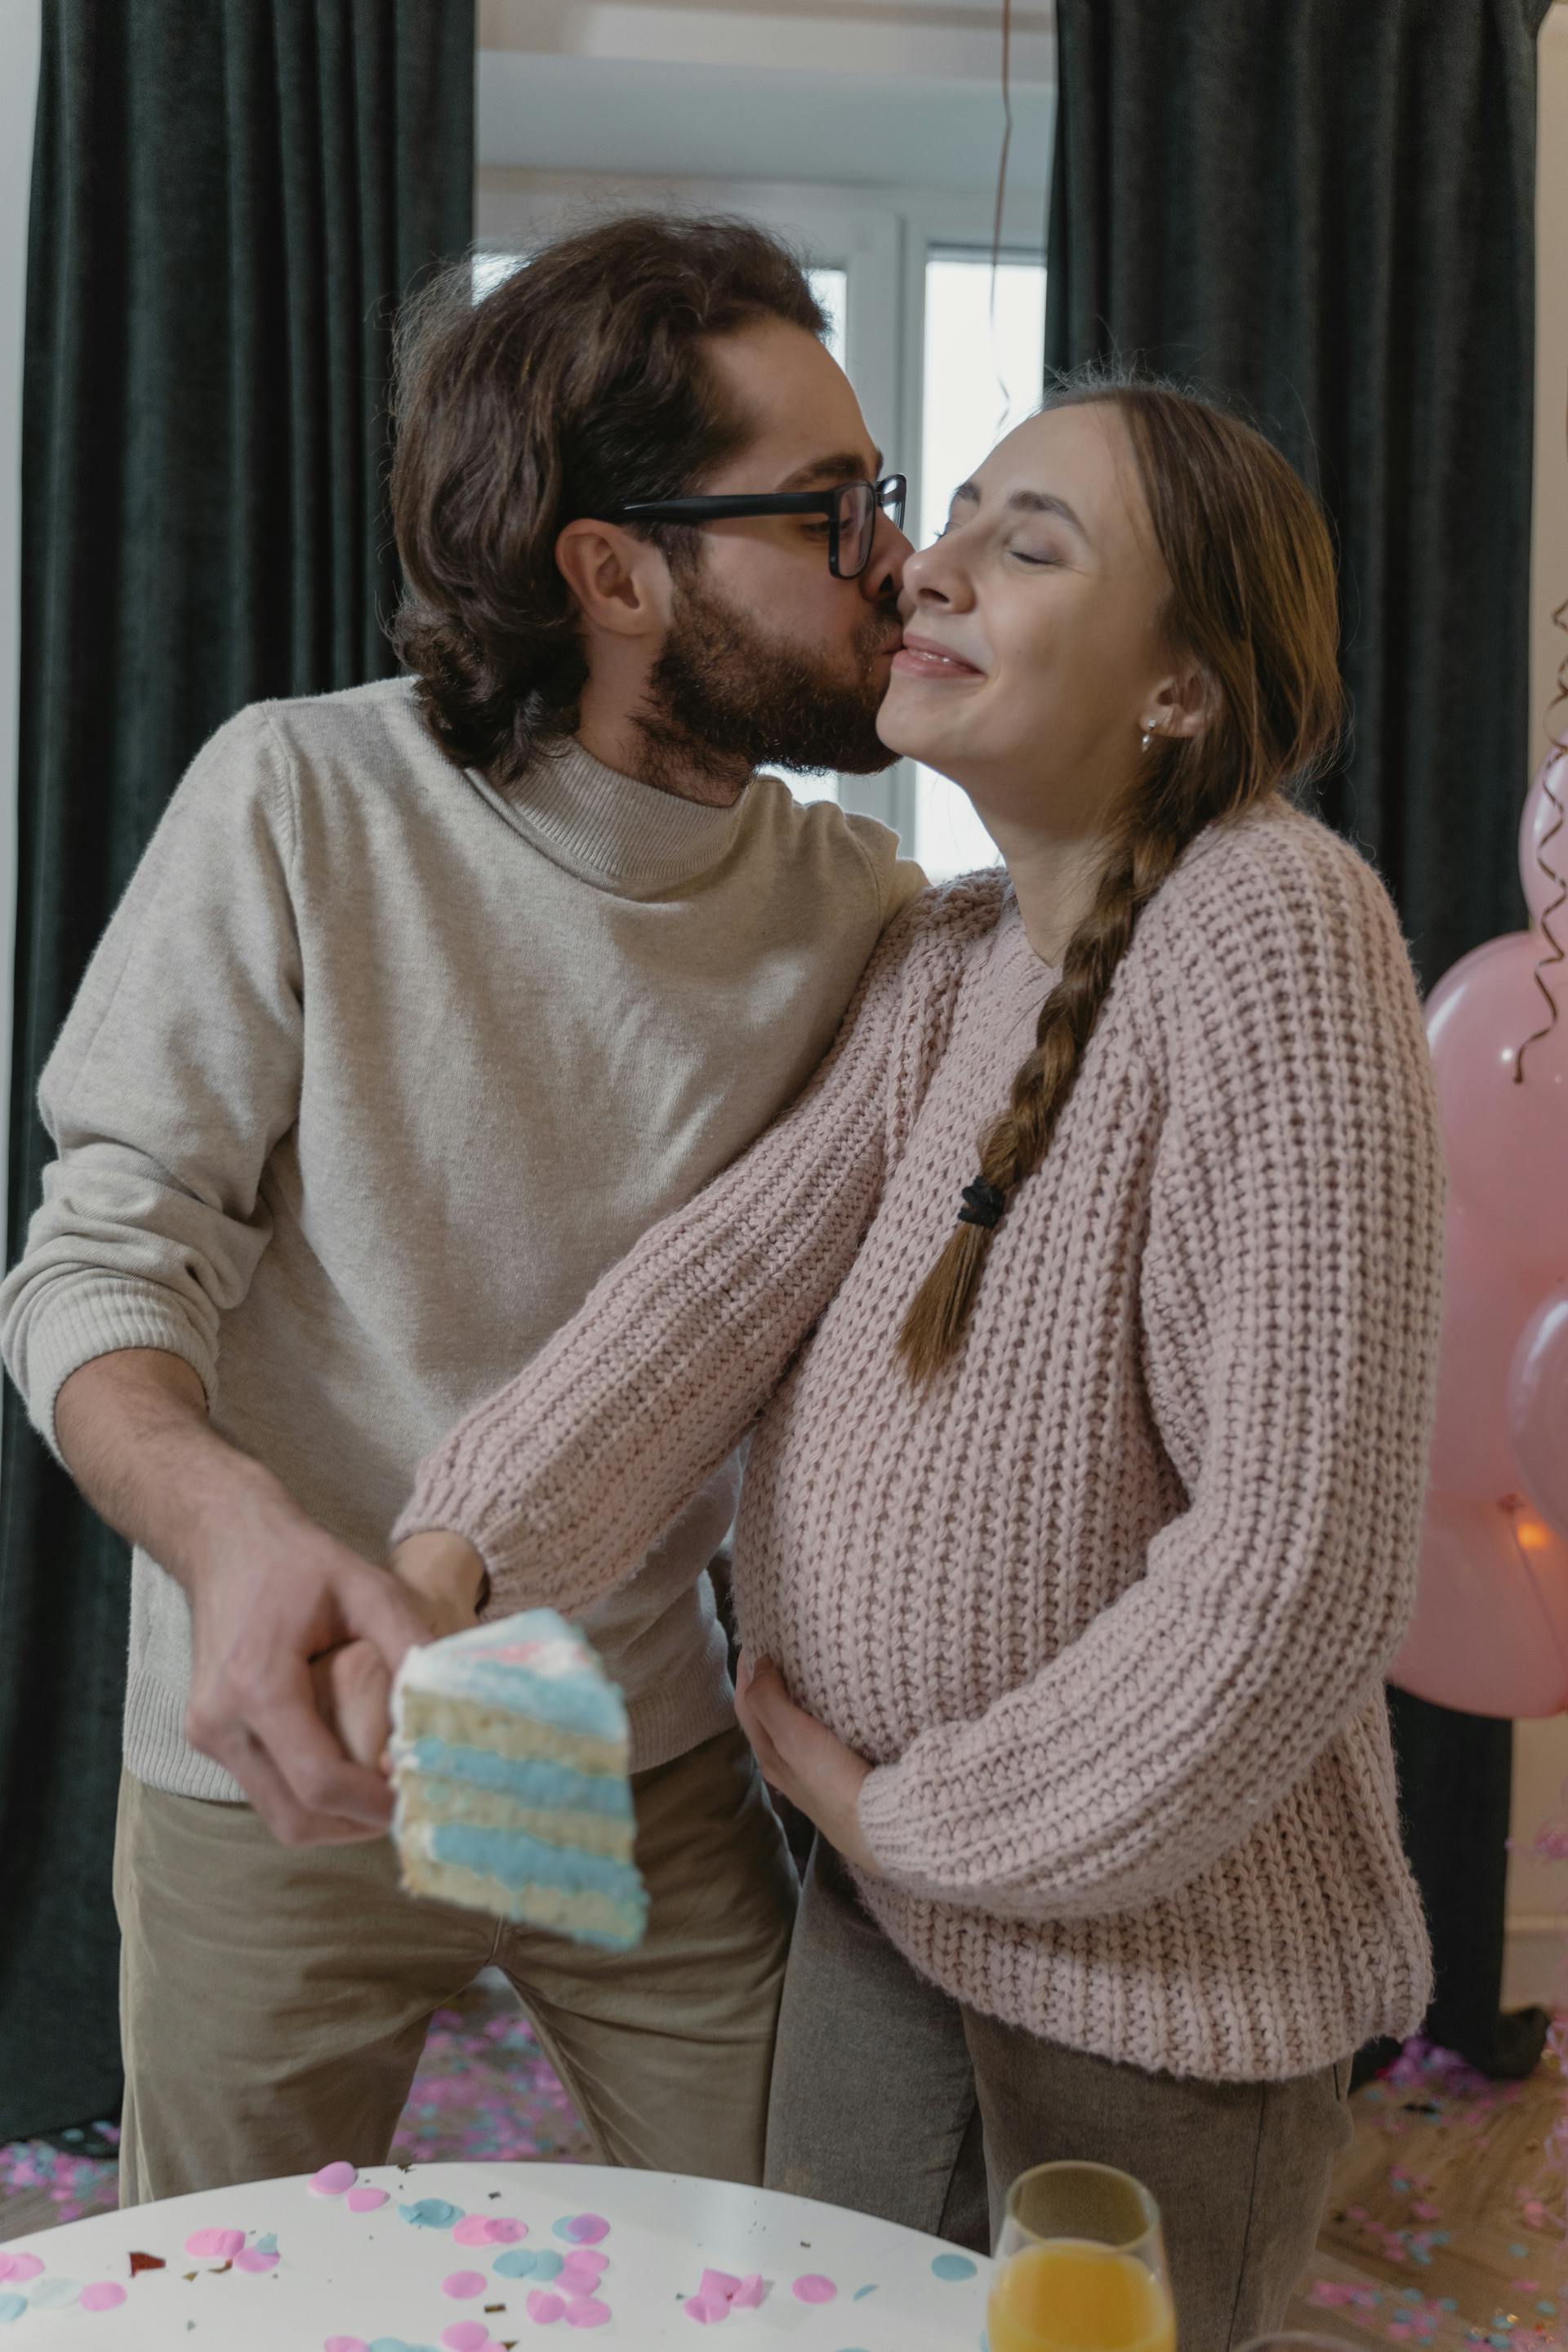 A couple kissing at their gender reveal party | Source: Pexels